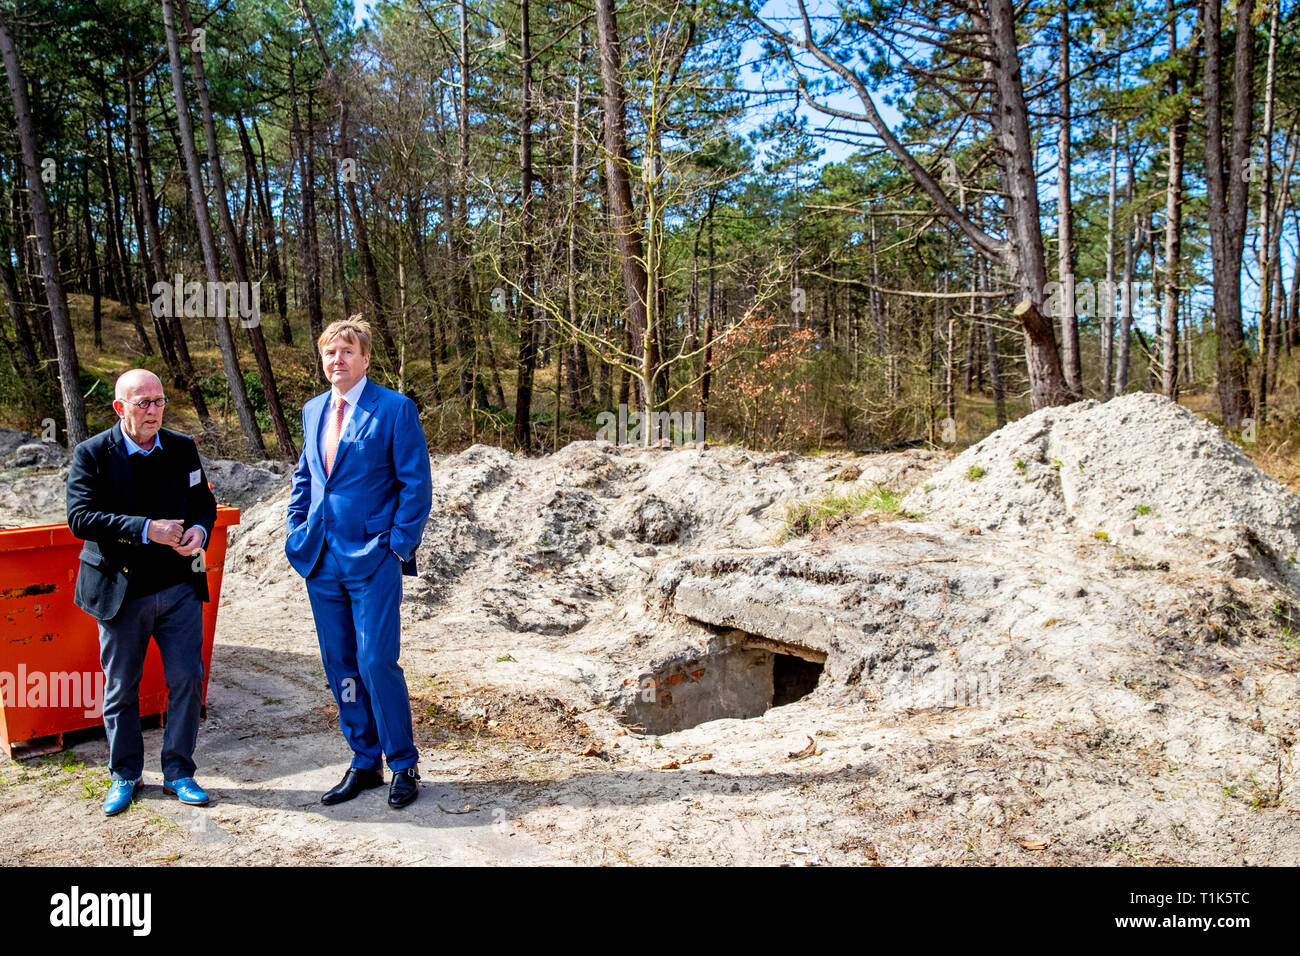 Terschelling, Nederland. 27th Mar, 2019. TERSCHELLING - King Willem-Alexander during a working visit to Terschelling in the context of Doing Together. A number of collective citizens' initiatives and cooperatives were visited during the visit. copyrughty Credit: robin utrecht/Alamy Live News Stock Photo